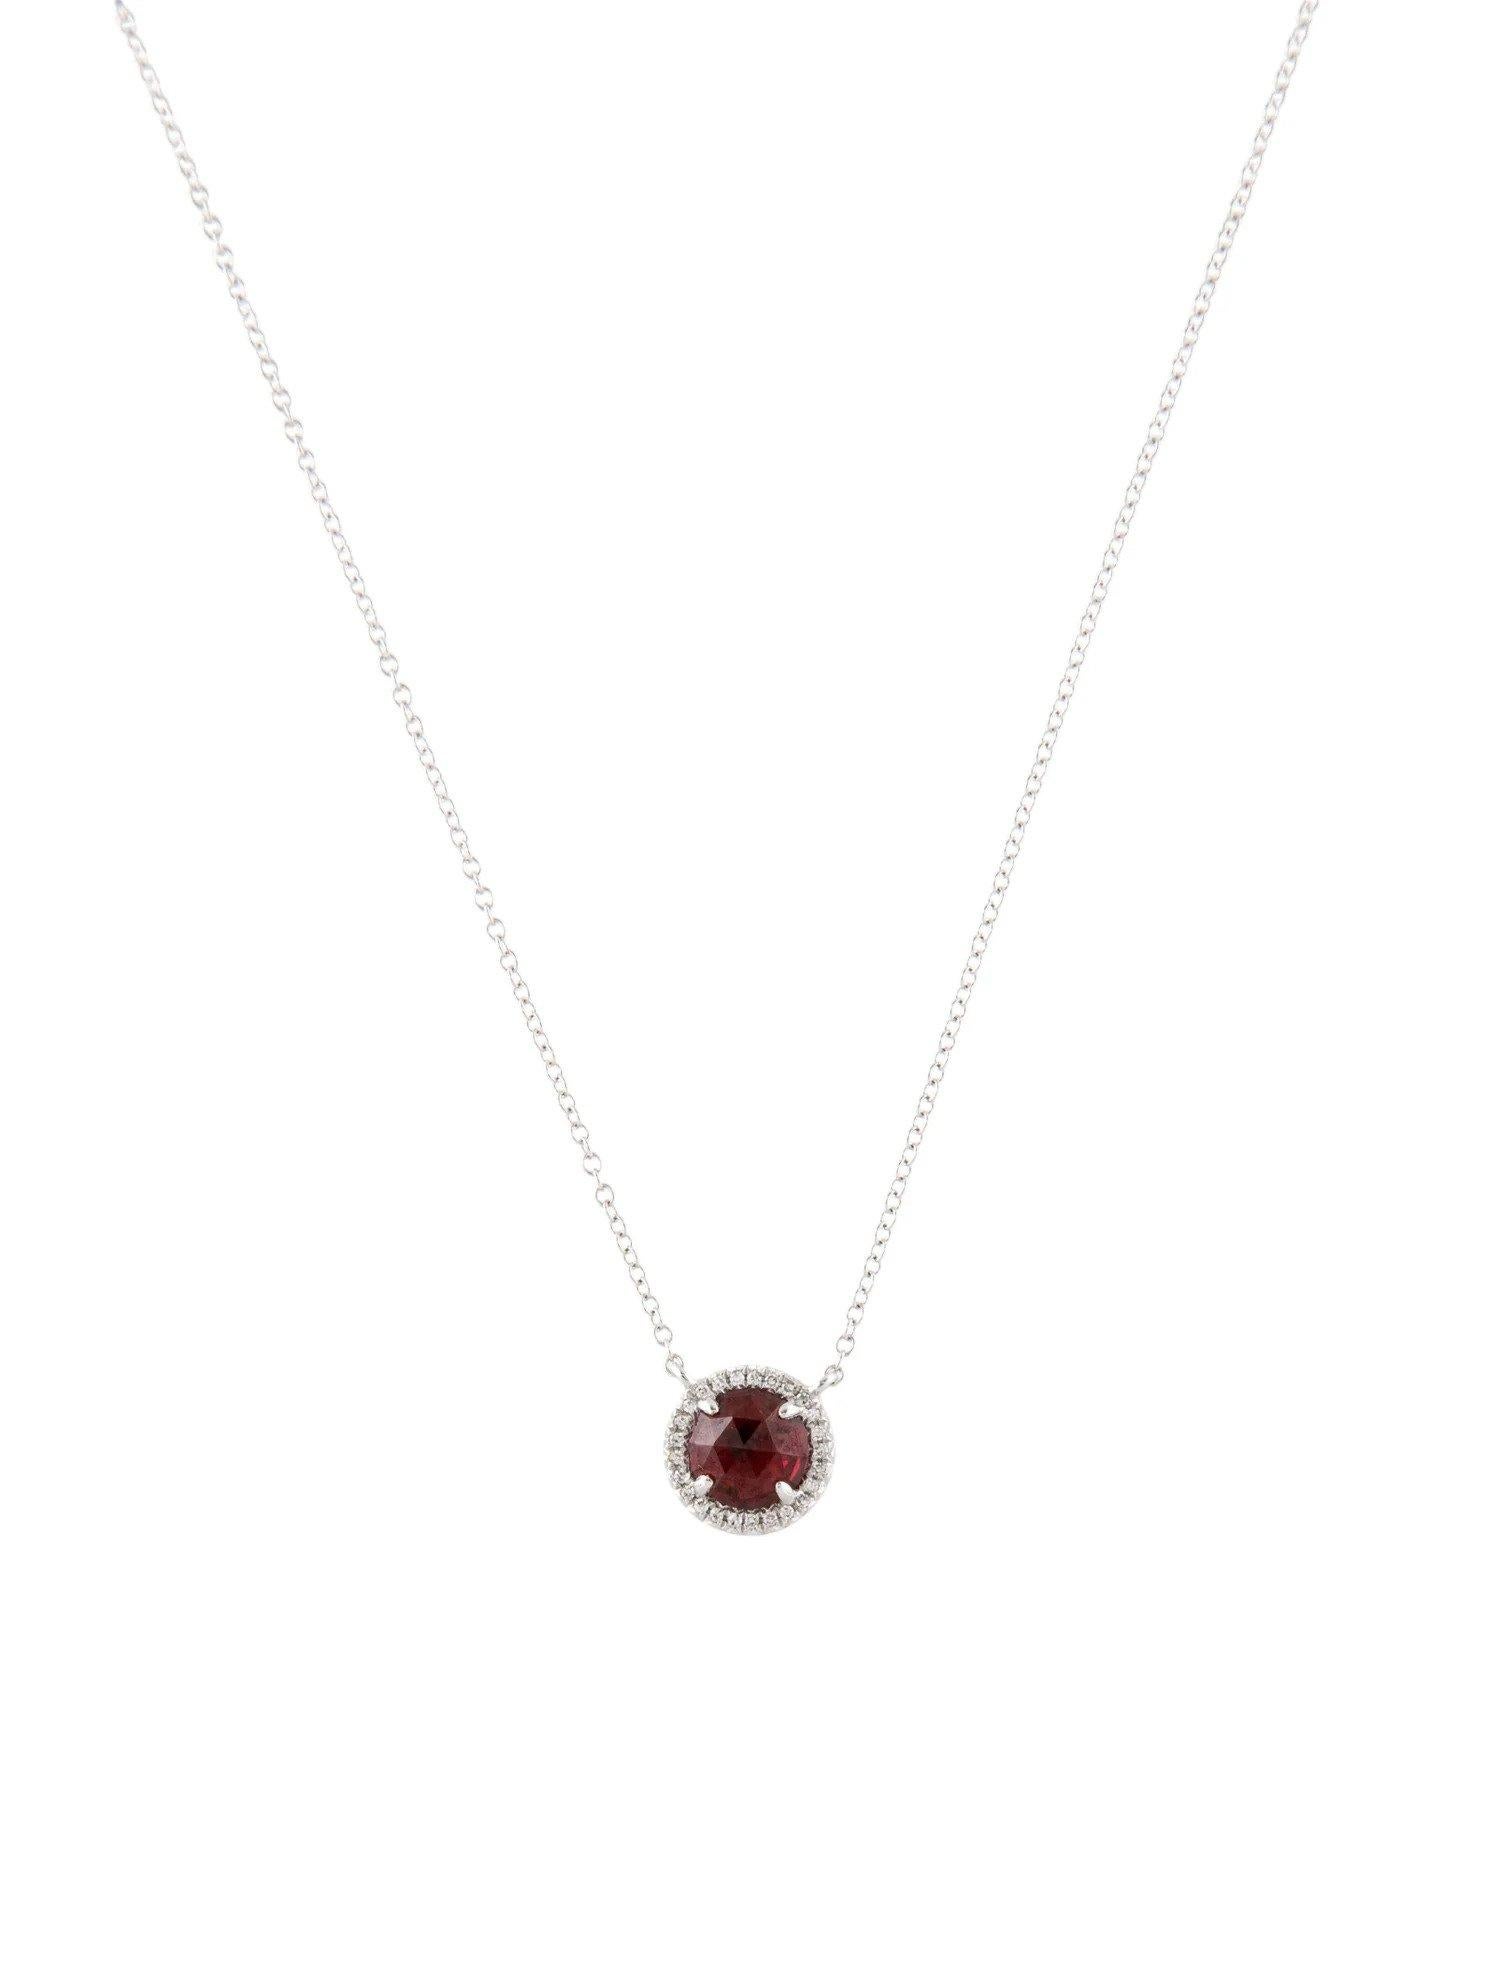 1.48 Carat Round Garnet & Diamond White Gold Pendant Necklace  In New Condition For Sale In Great Neck, NY